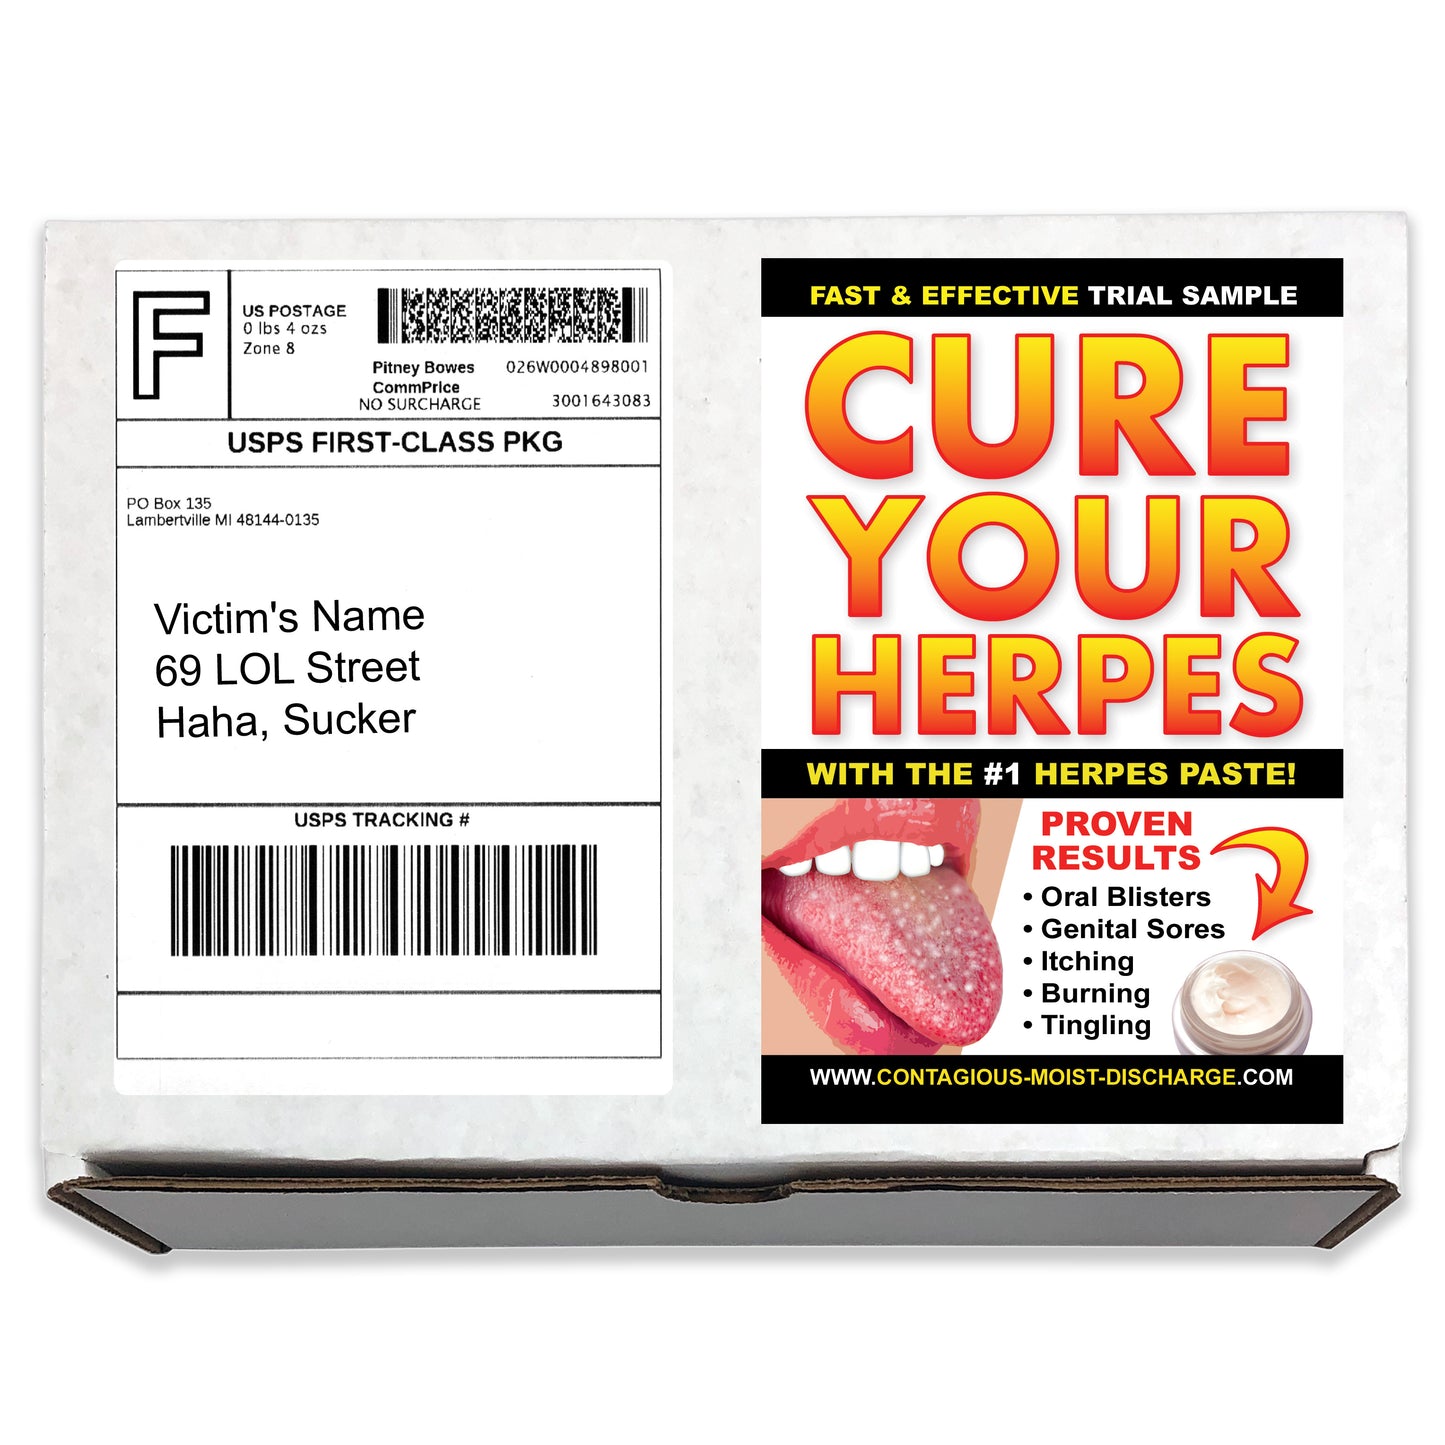 Cure Your Herpes embarrassing prank box